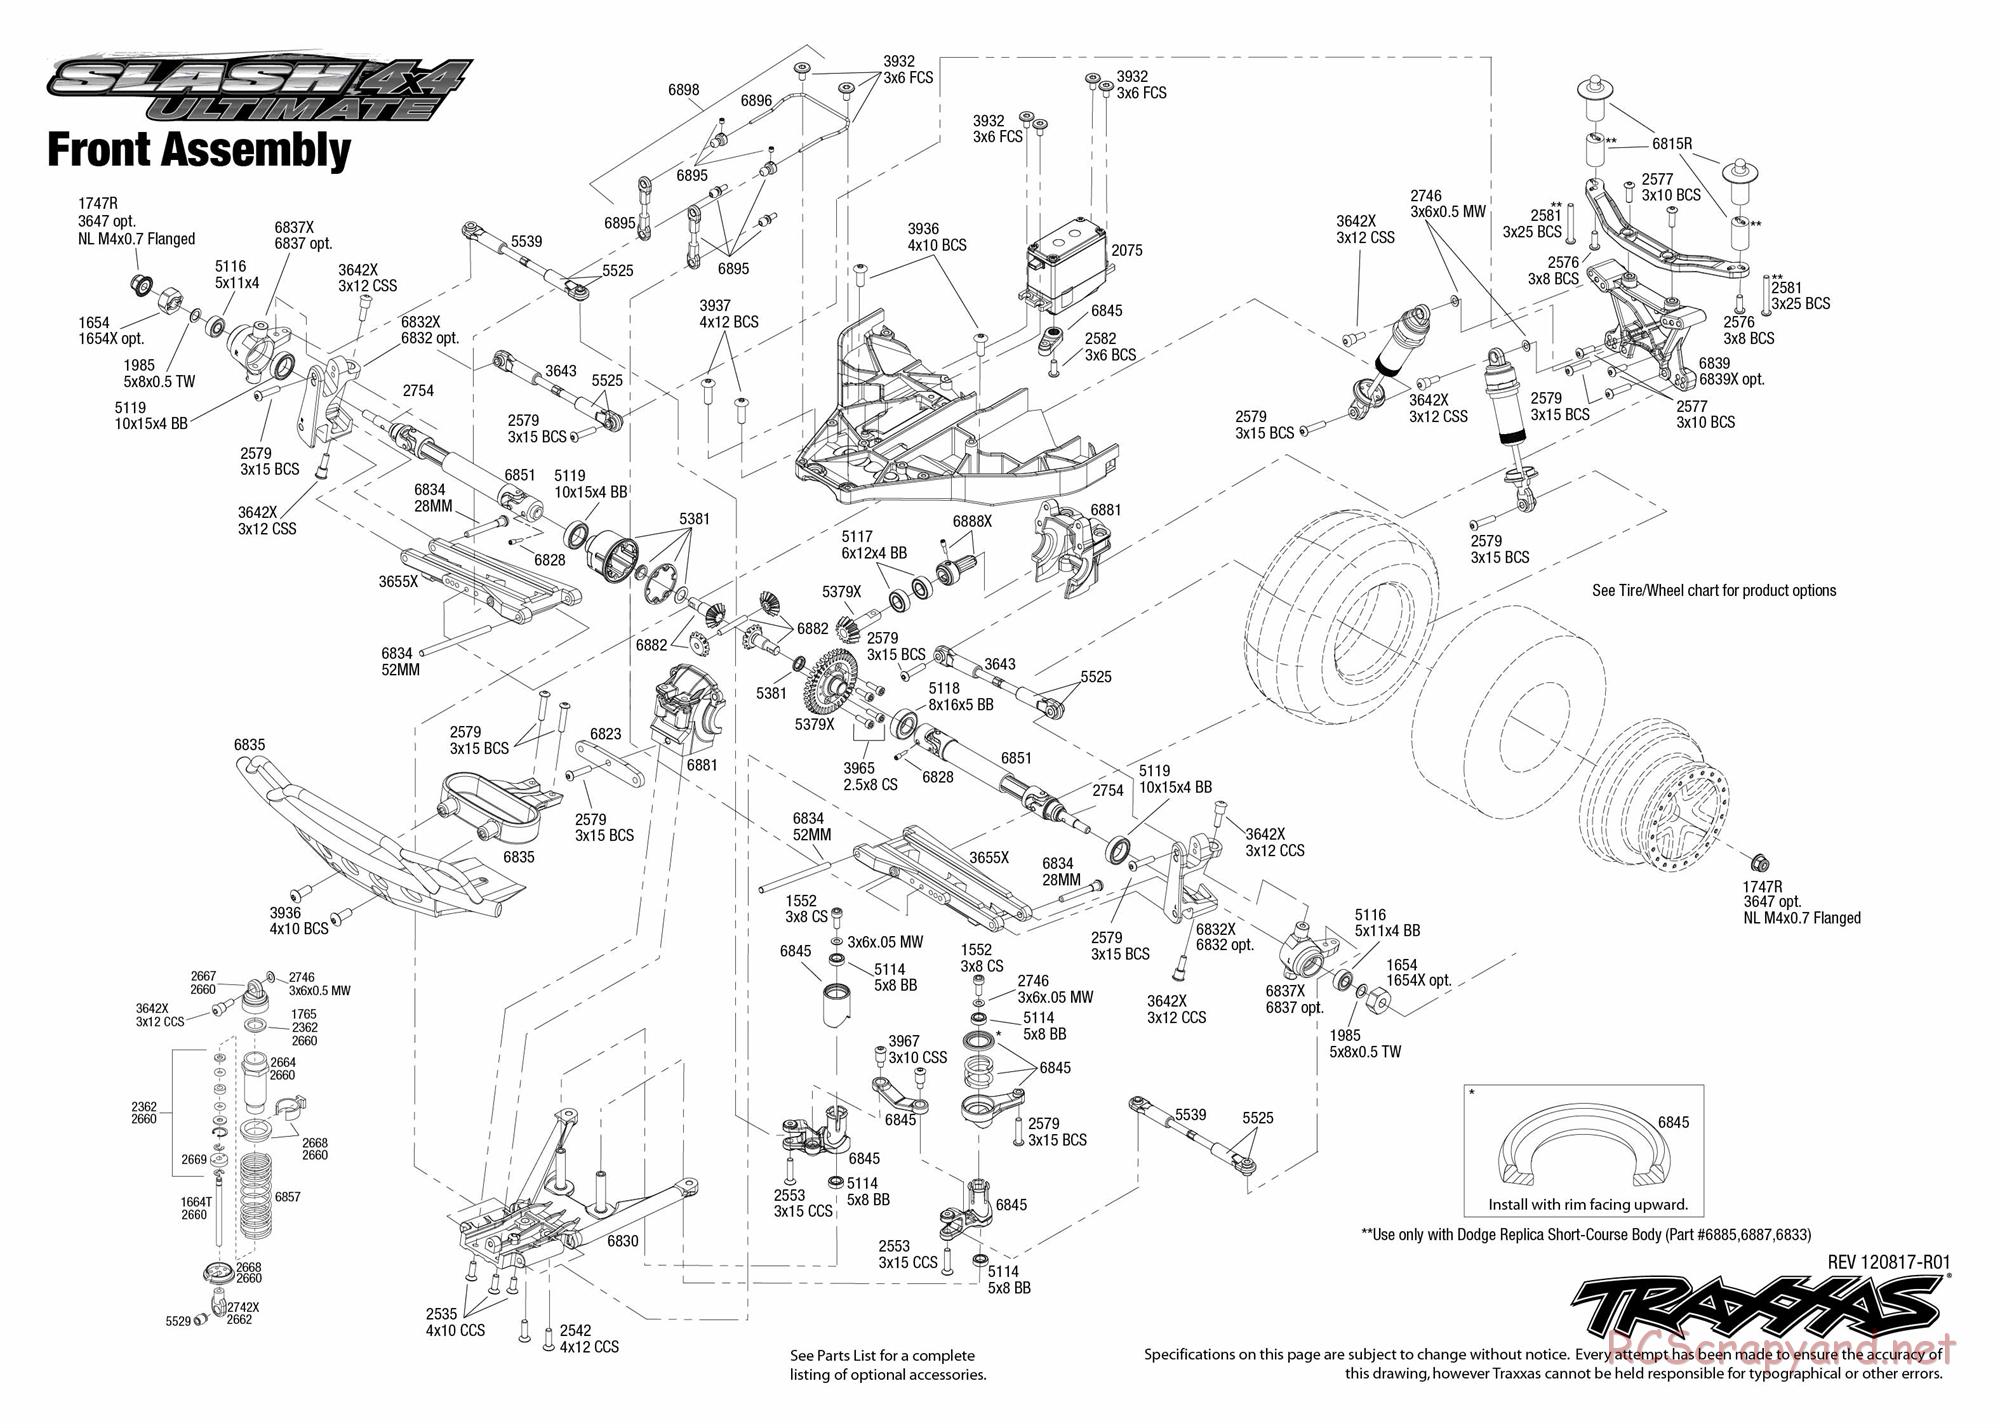 Traxxas - Slash 4x4 Ultimate - Exploded Views - Page 4